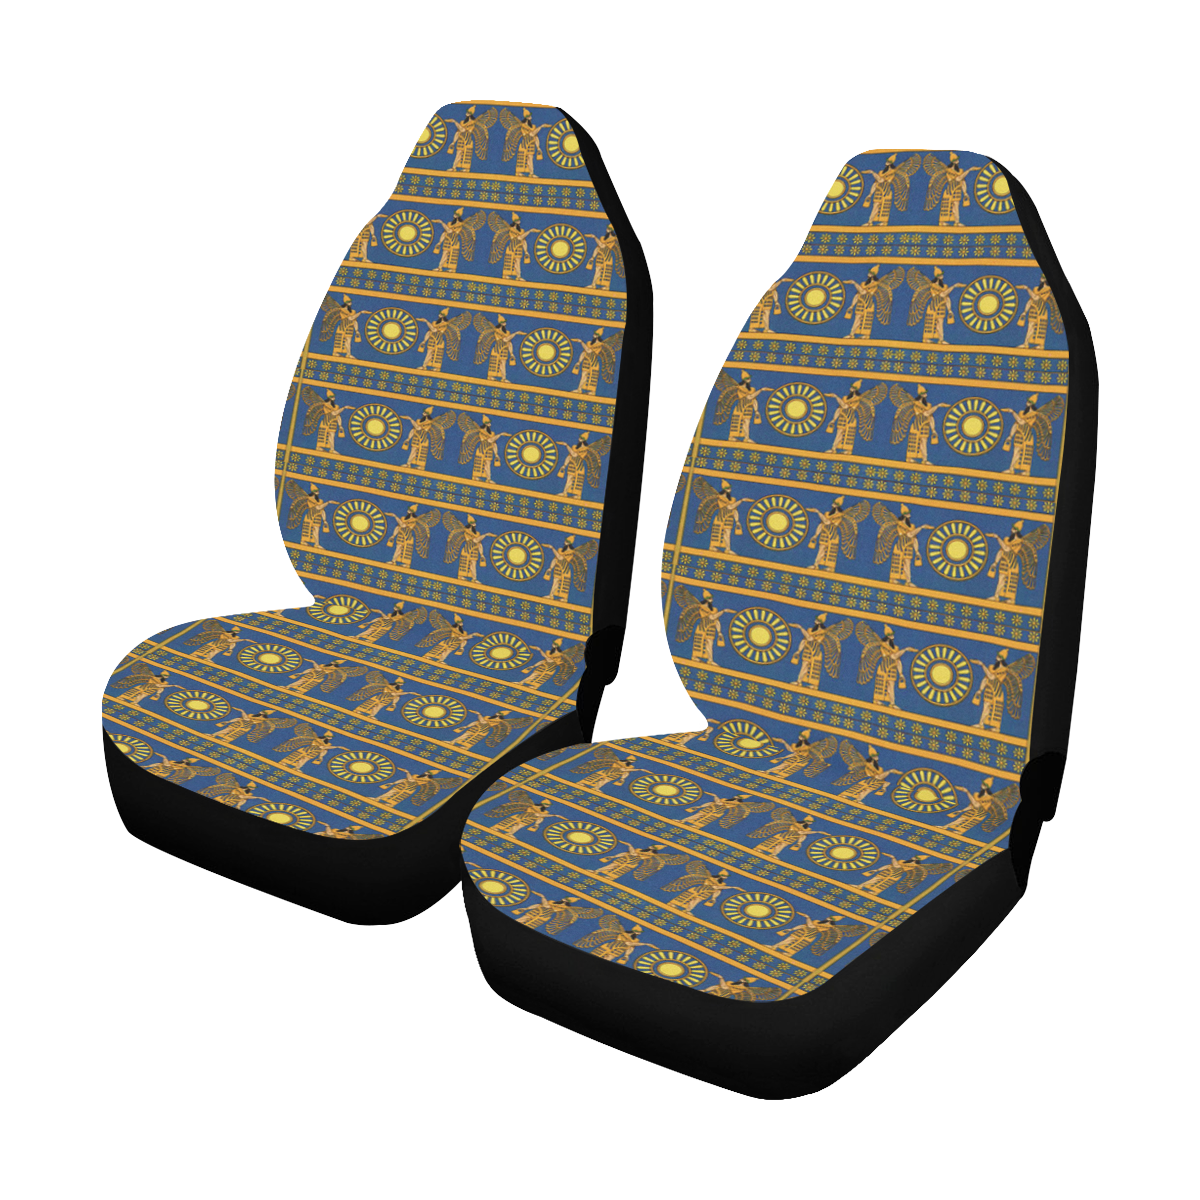 Pattern assyrian kings Car Seat Covers (Set of 2)